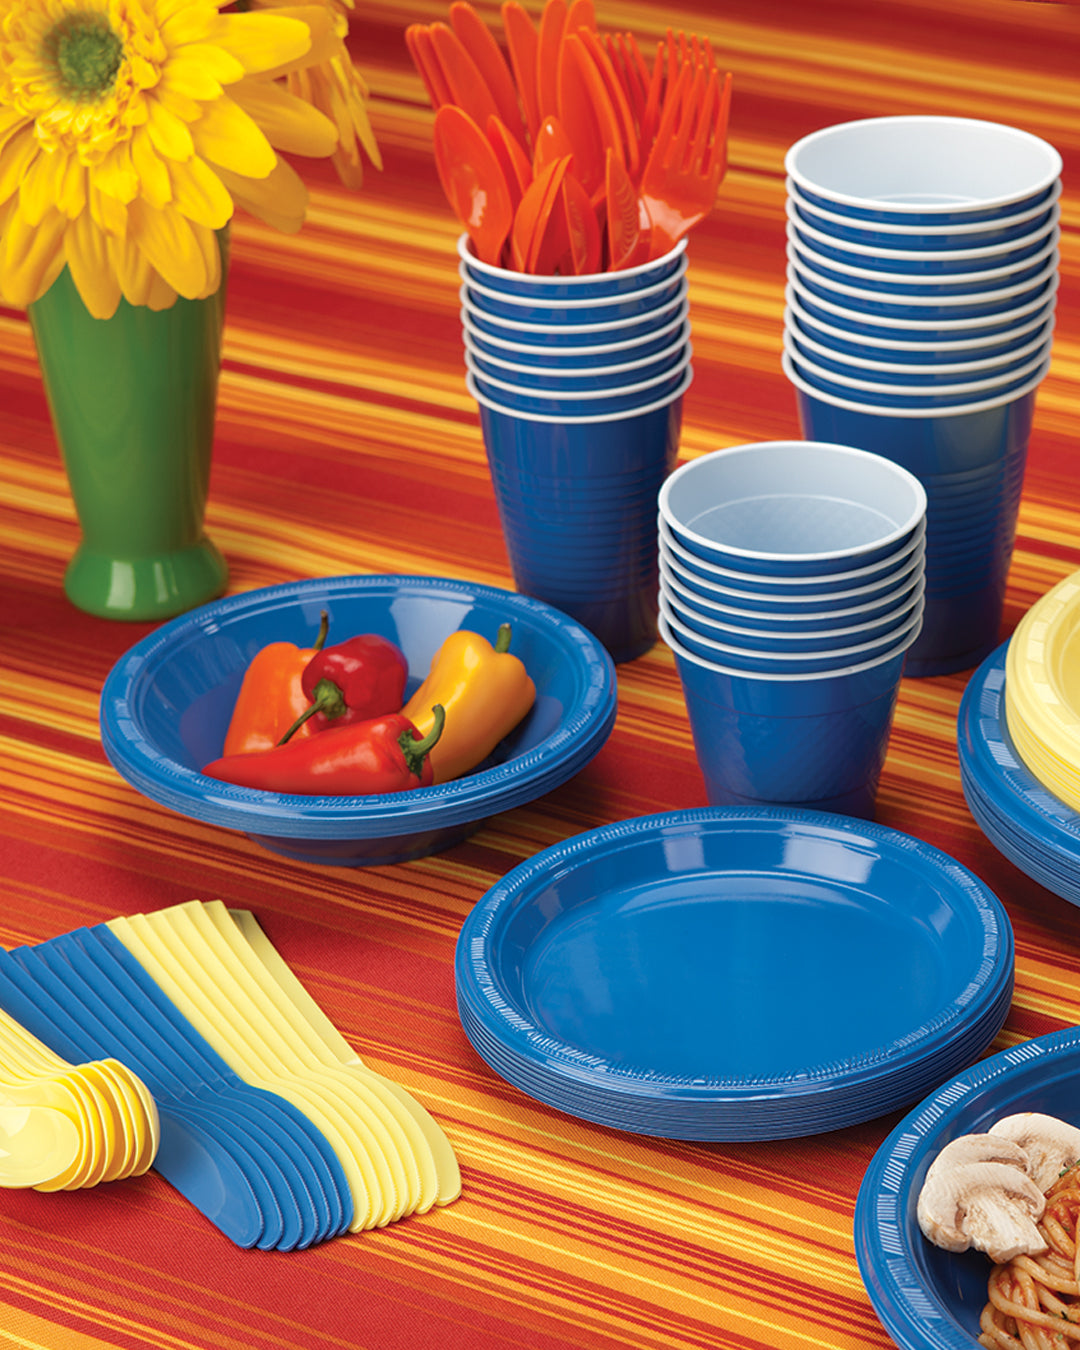 Plastic Solid Color Party Tableware<br/>Size Options: 10.25inch Plate, 9inch Plate, 7inch Plate, 15oz Bowl, 18oz Cup, 12oz Cup, 9oz Cup, 10.25inch Compartment Plate